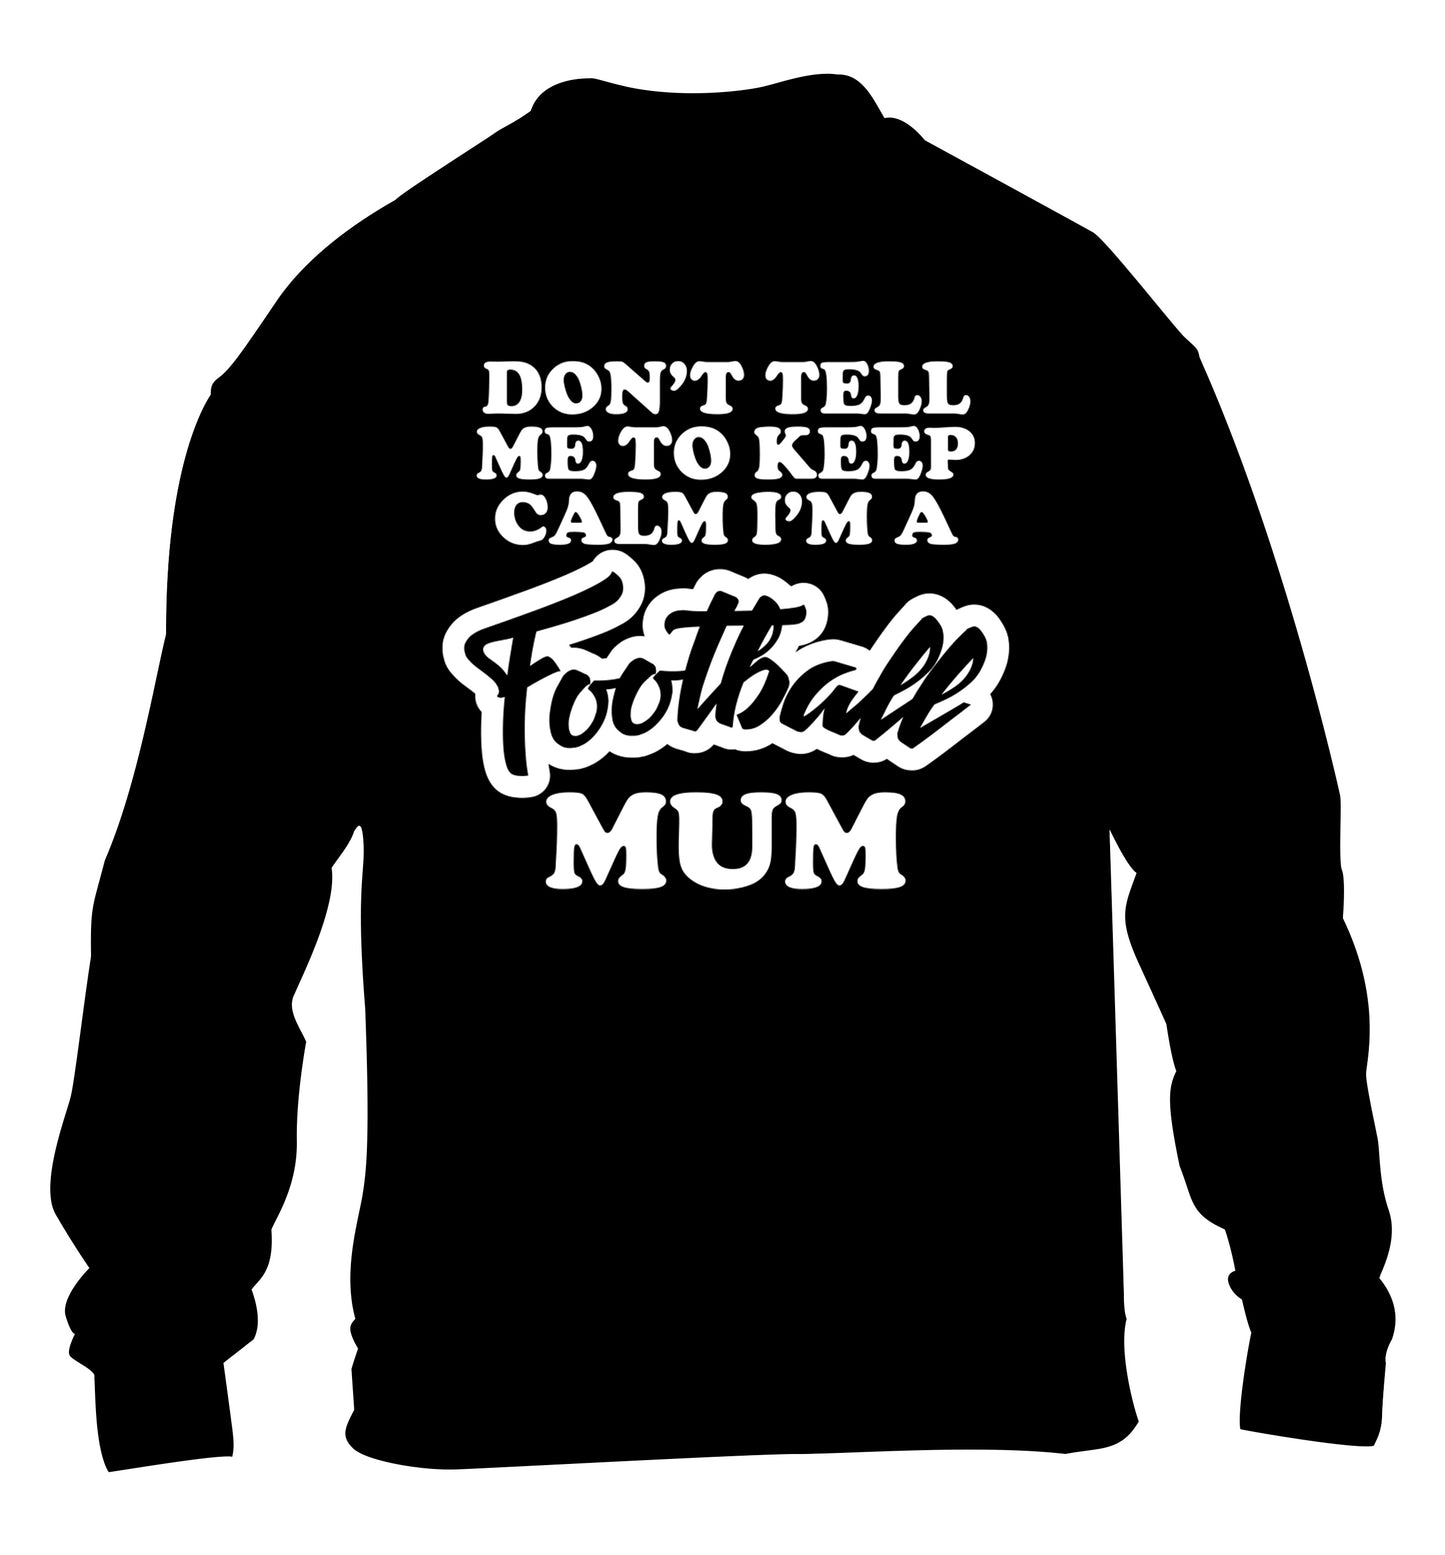 Don't tell me to keep calm I'm a football mum children's black sweater 12-14 Years